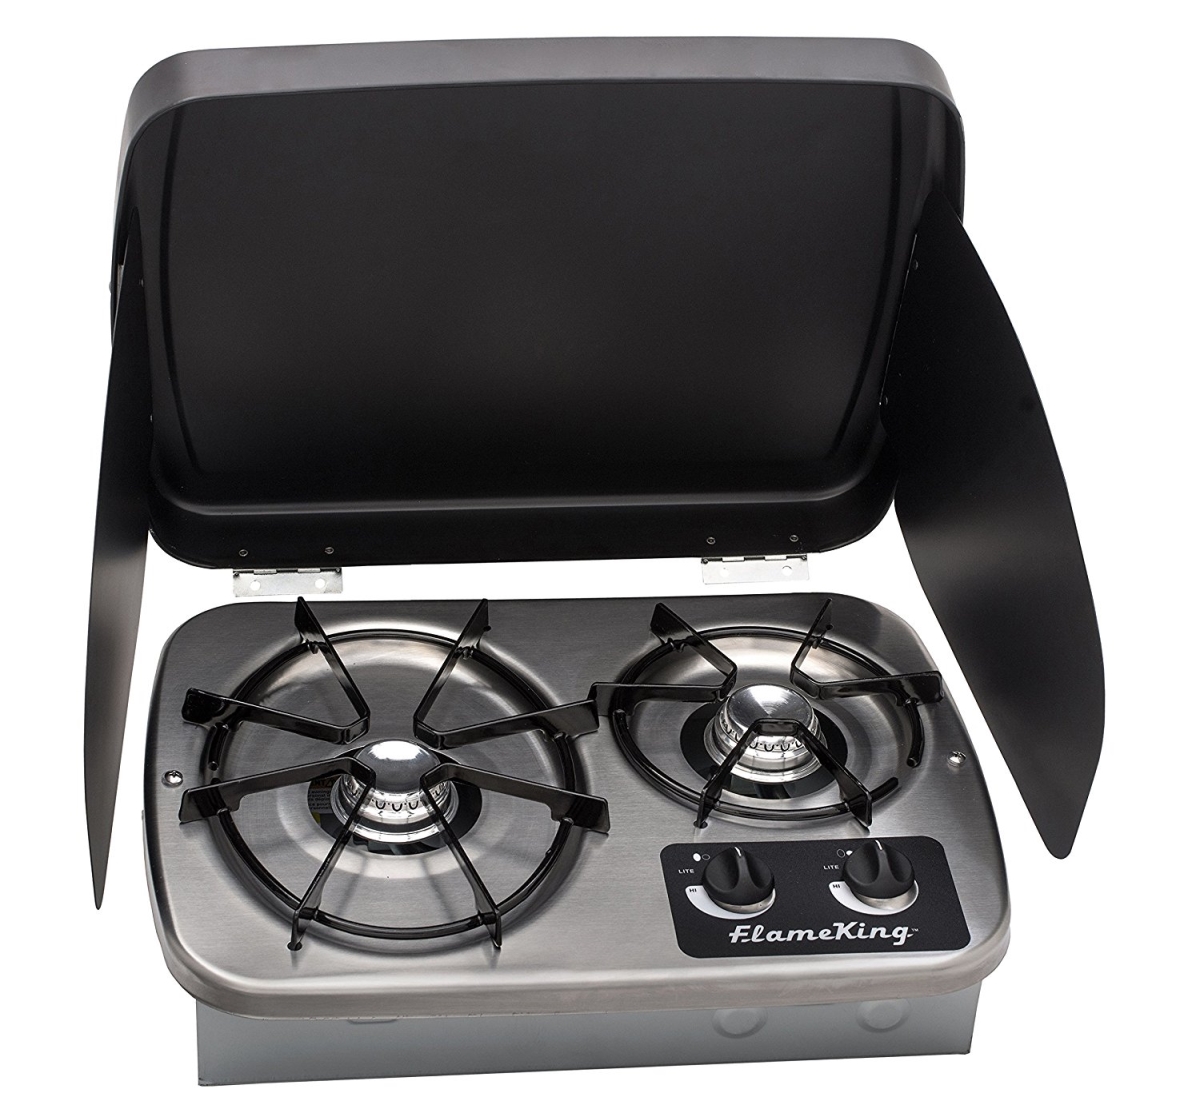 Y6e-ht600 Stove Drop In Cooktop With 2 Burner